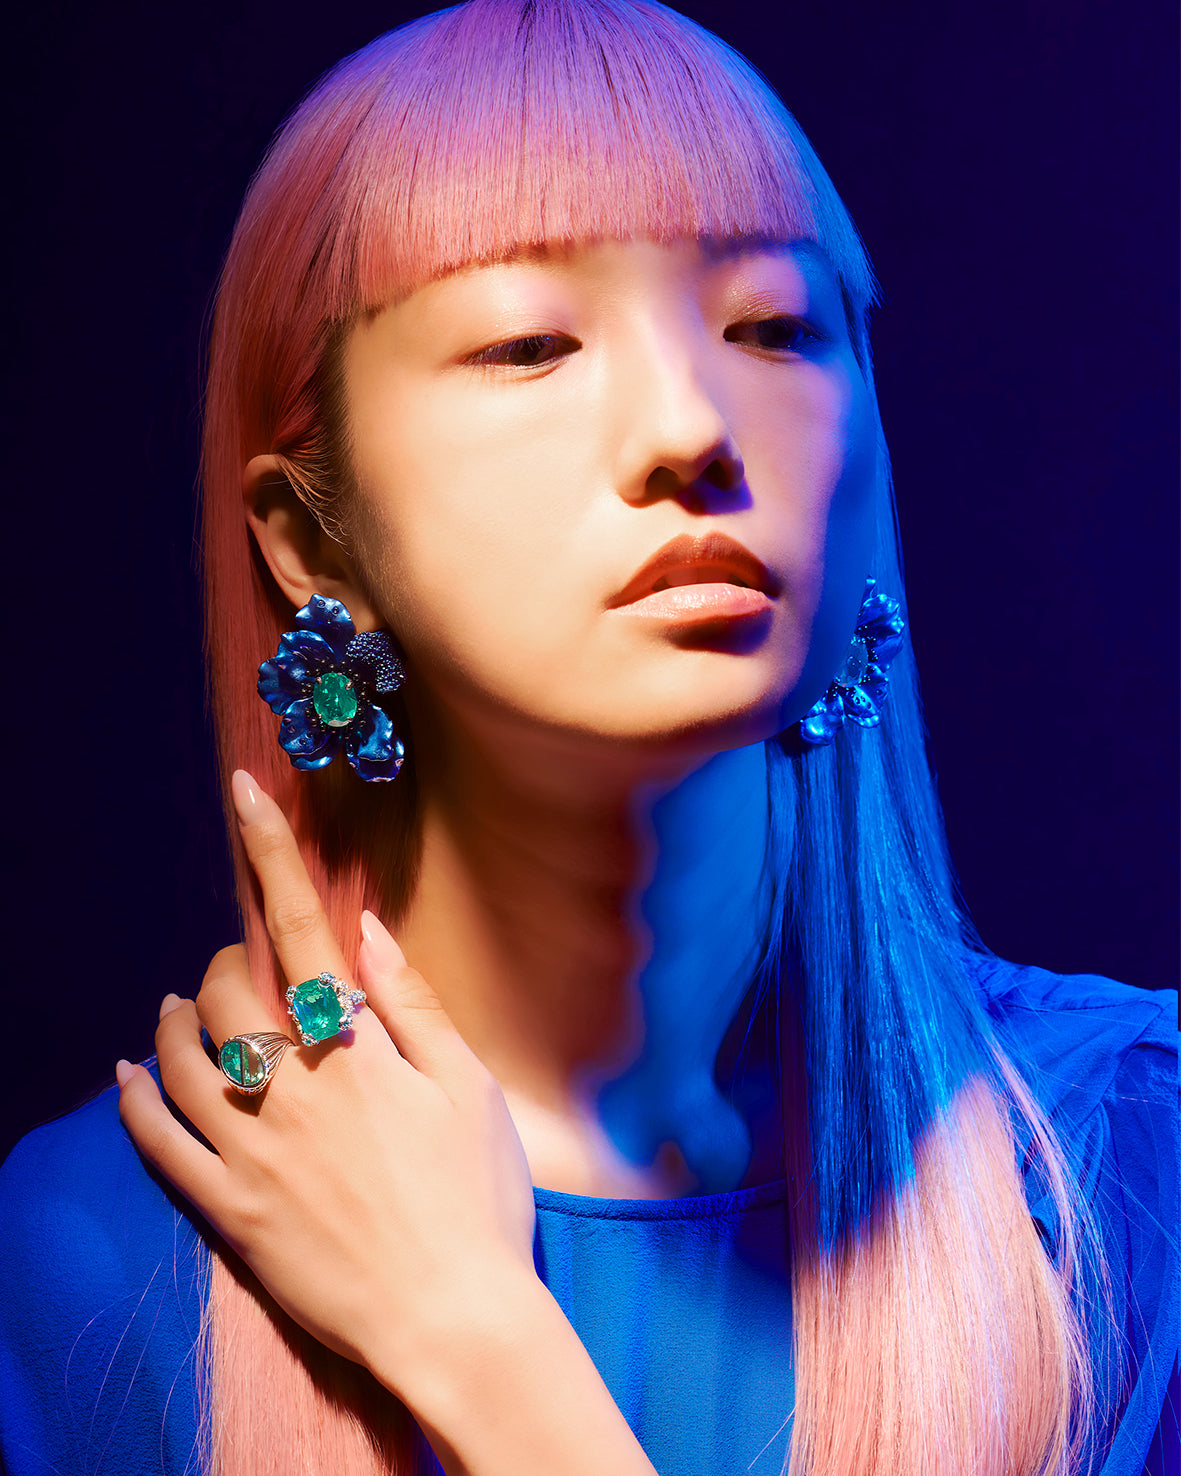 Anabela Chan Joaillerie_Paraiba Blue Poppy Earrings, Ocean Paraiba Ring, Paraiba Opal Ocean Rings & Paraiba Oval Signet Ring_Model Campaign Image